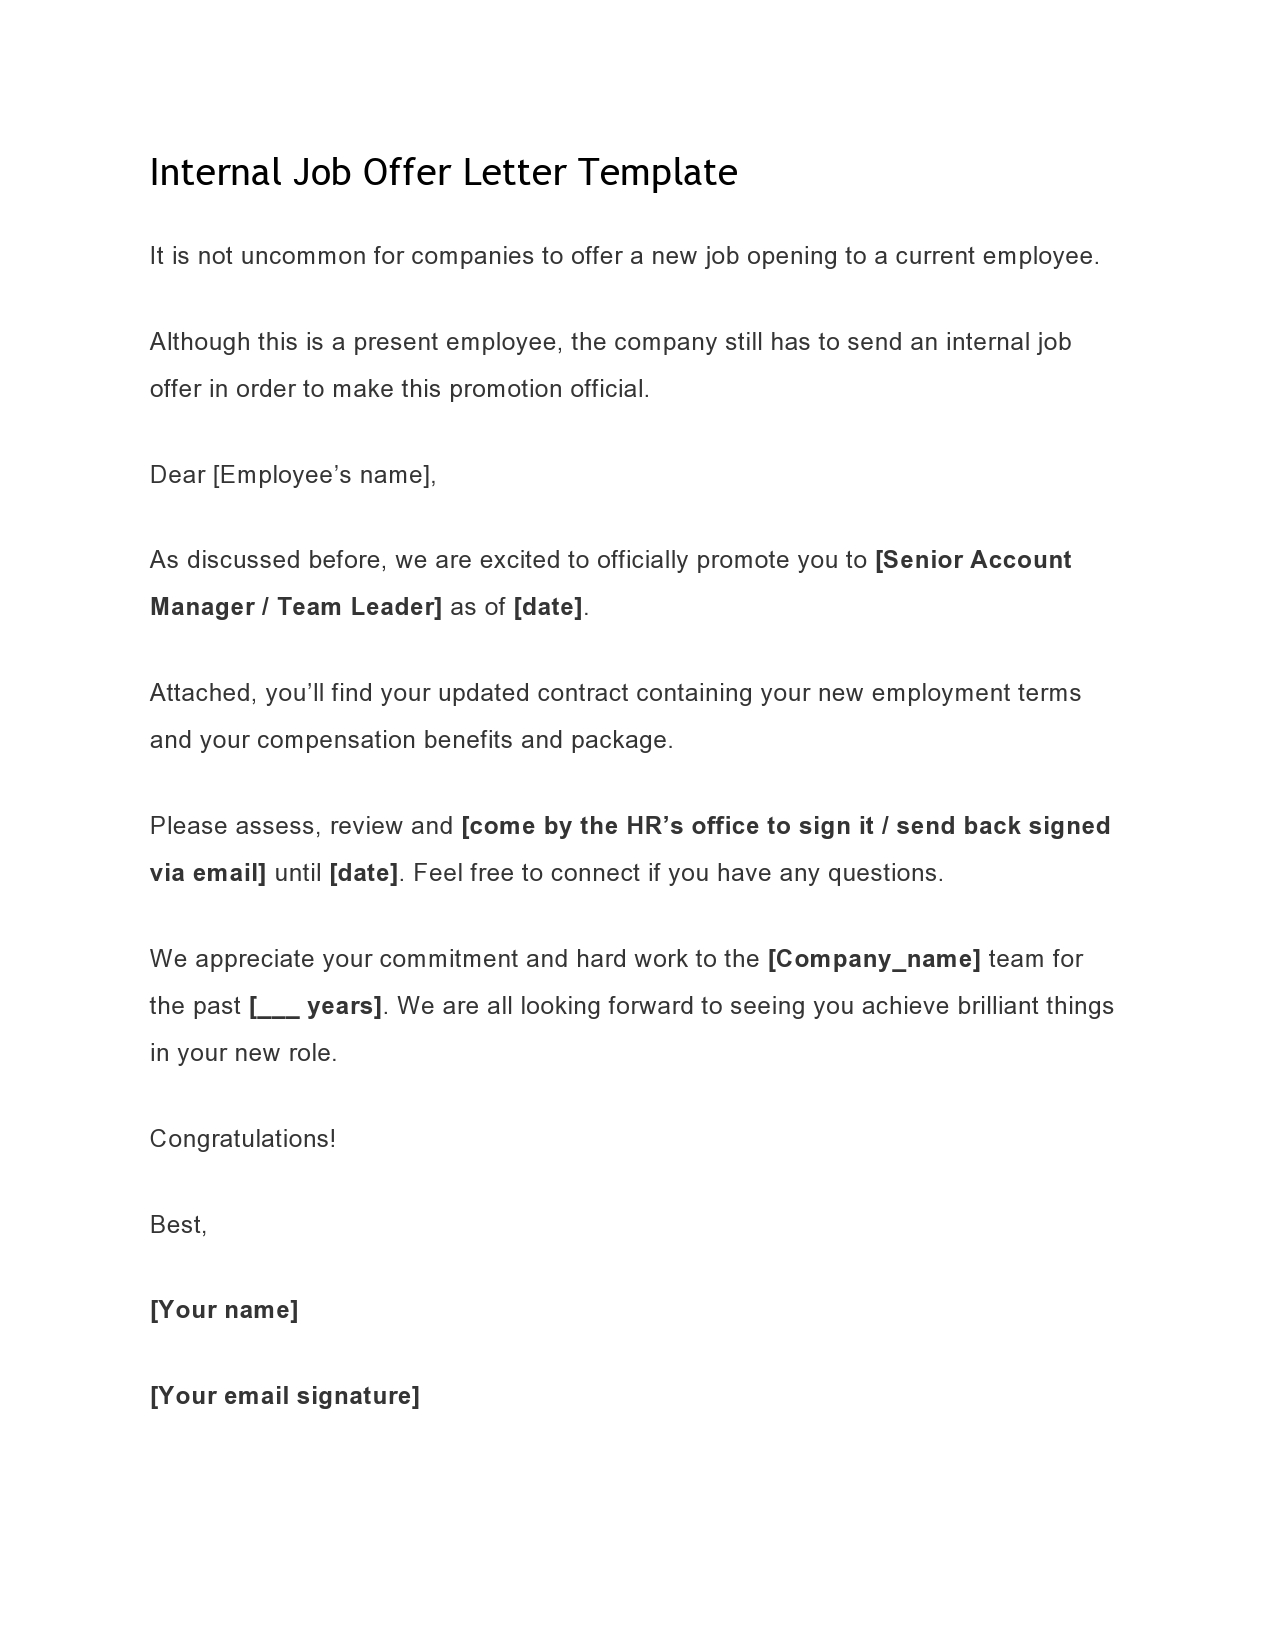 Free employment offer letter template 17